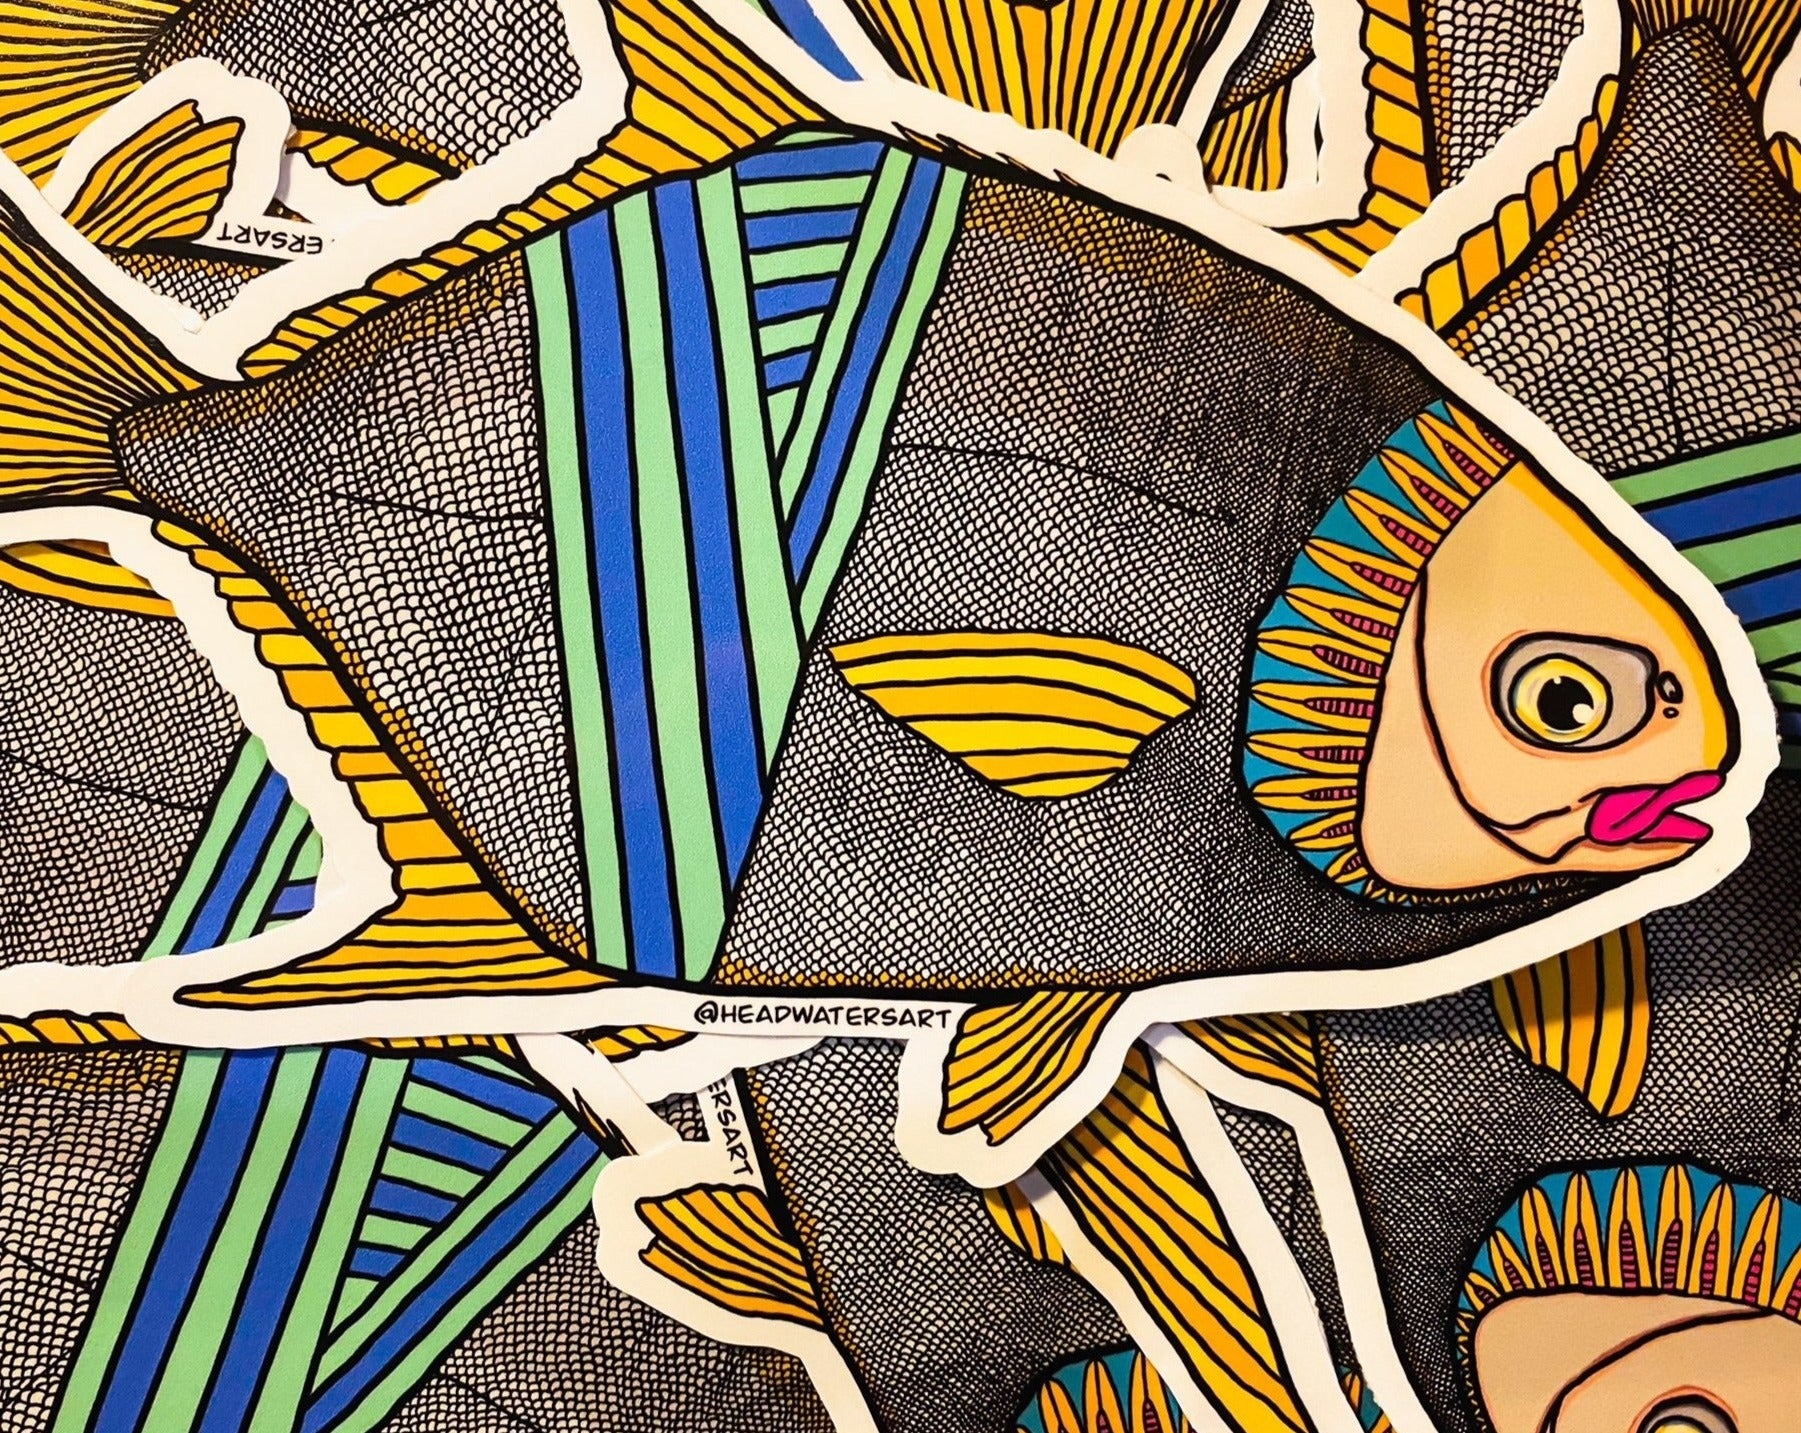 Permit artwork featuring hand-drawn art by Justin Webber. All fish measure approximately 120mm and 250mm. Premium vinyl stickers, specially laminated to resist the elements.